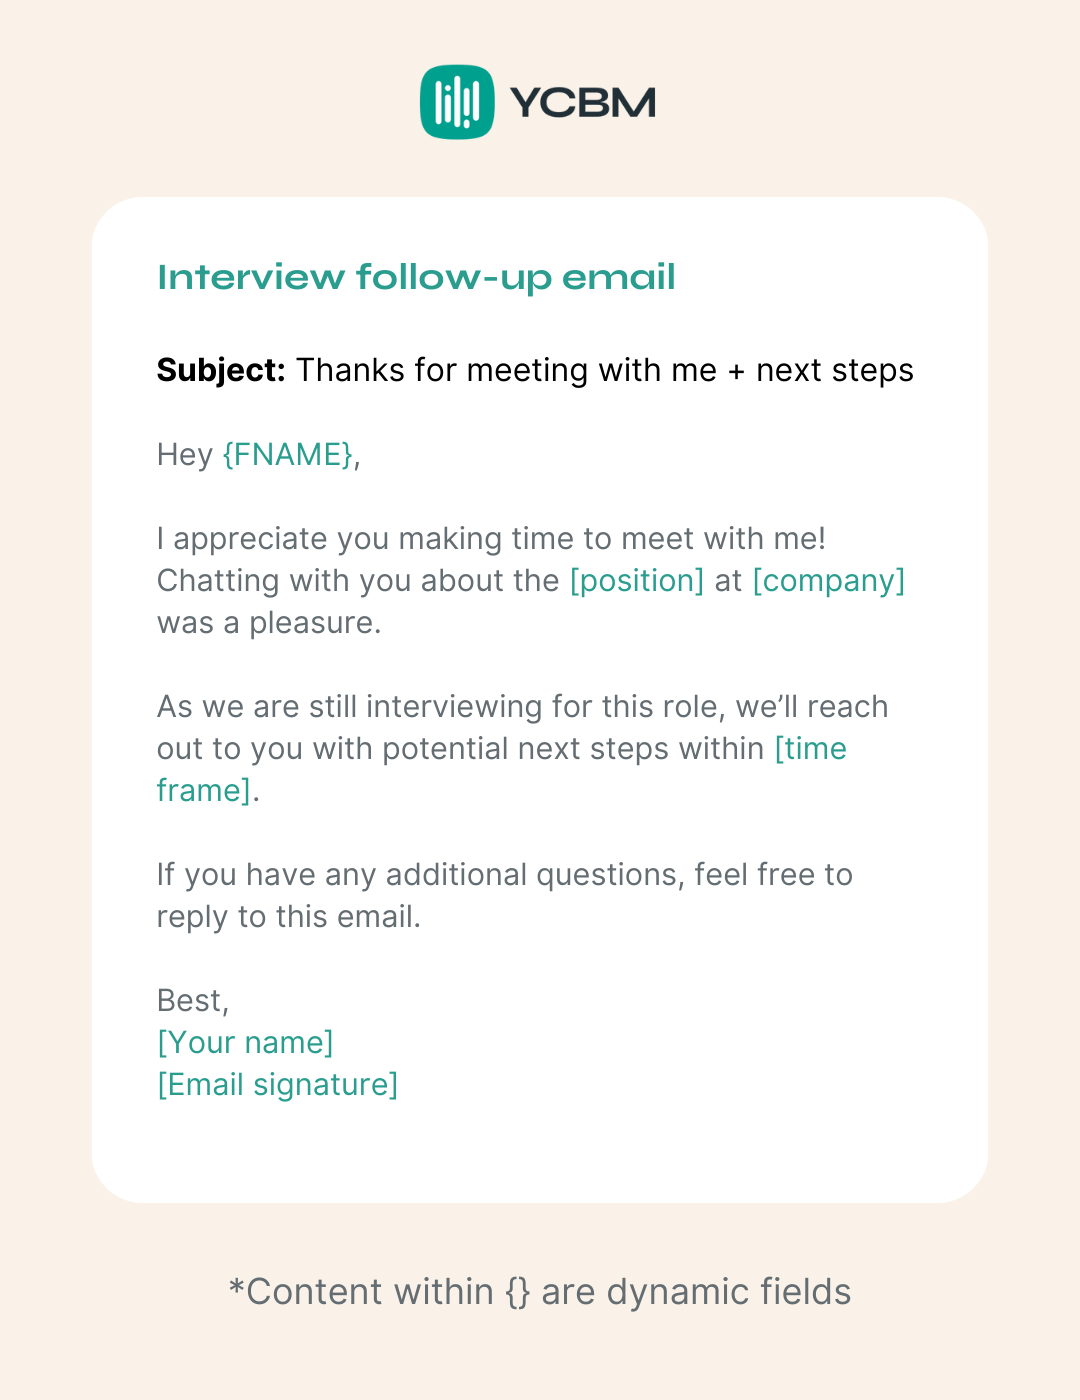 Interview follow-up email template